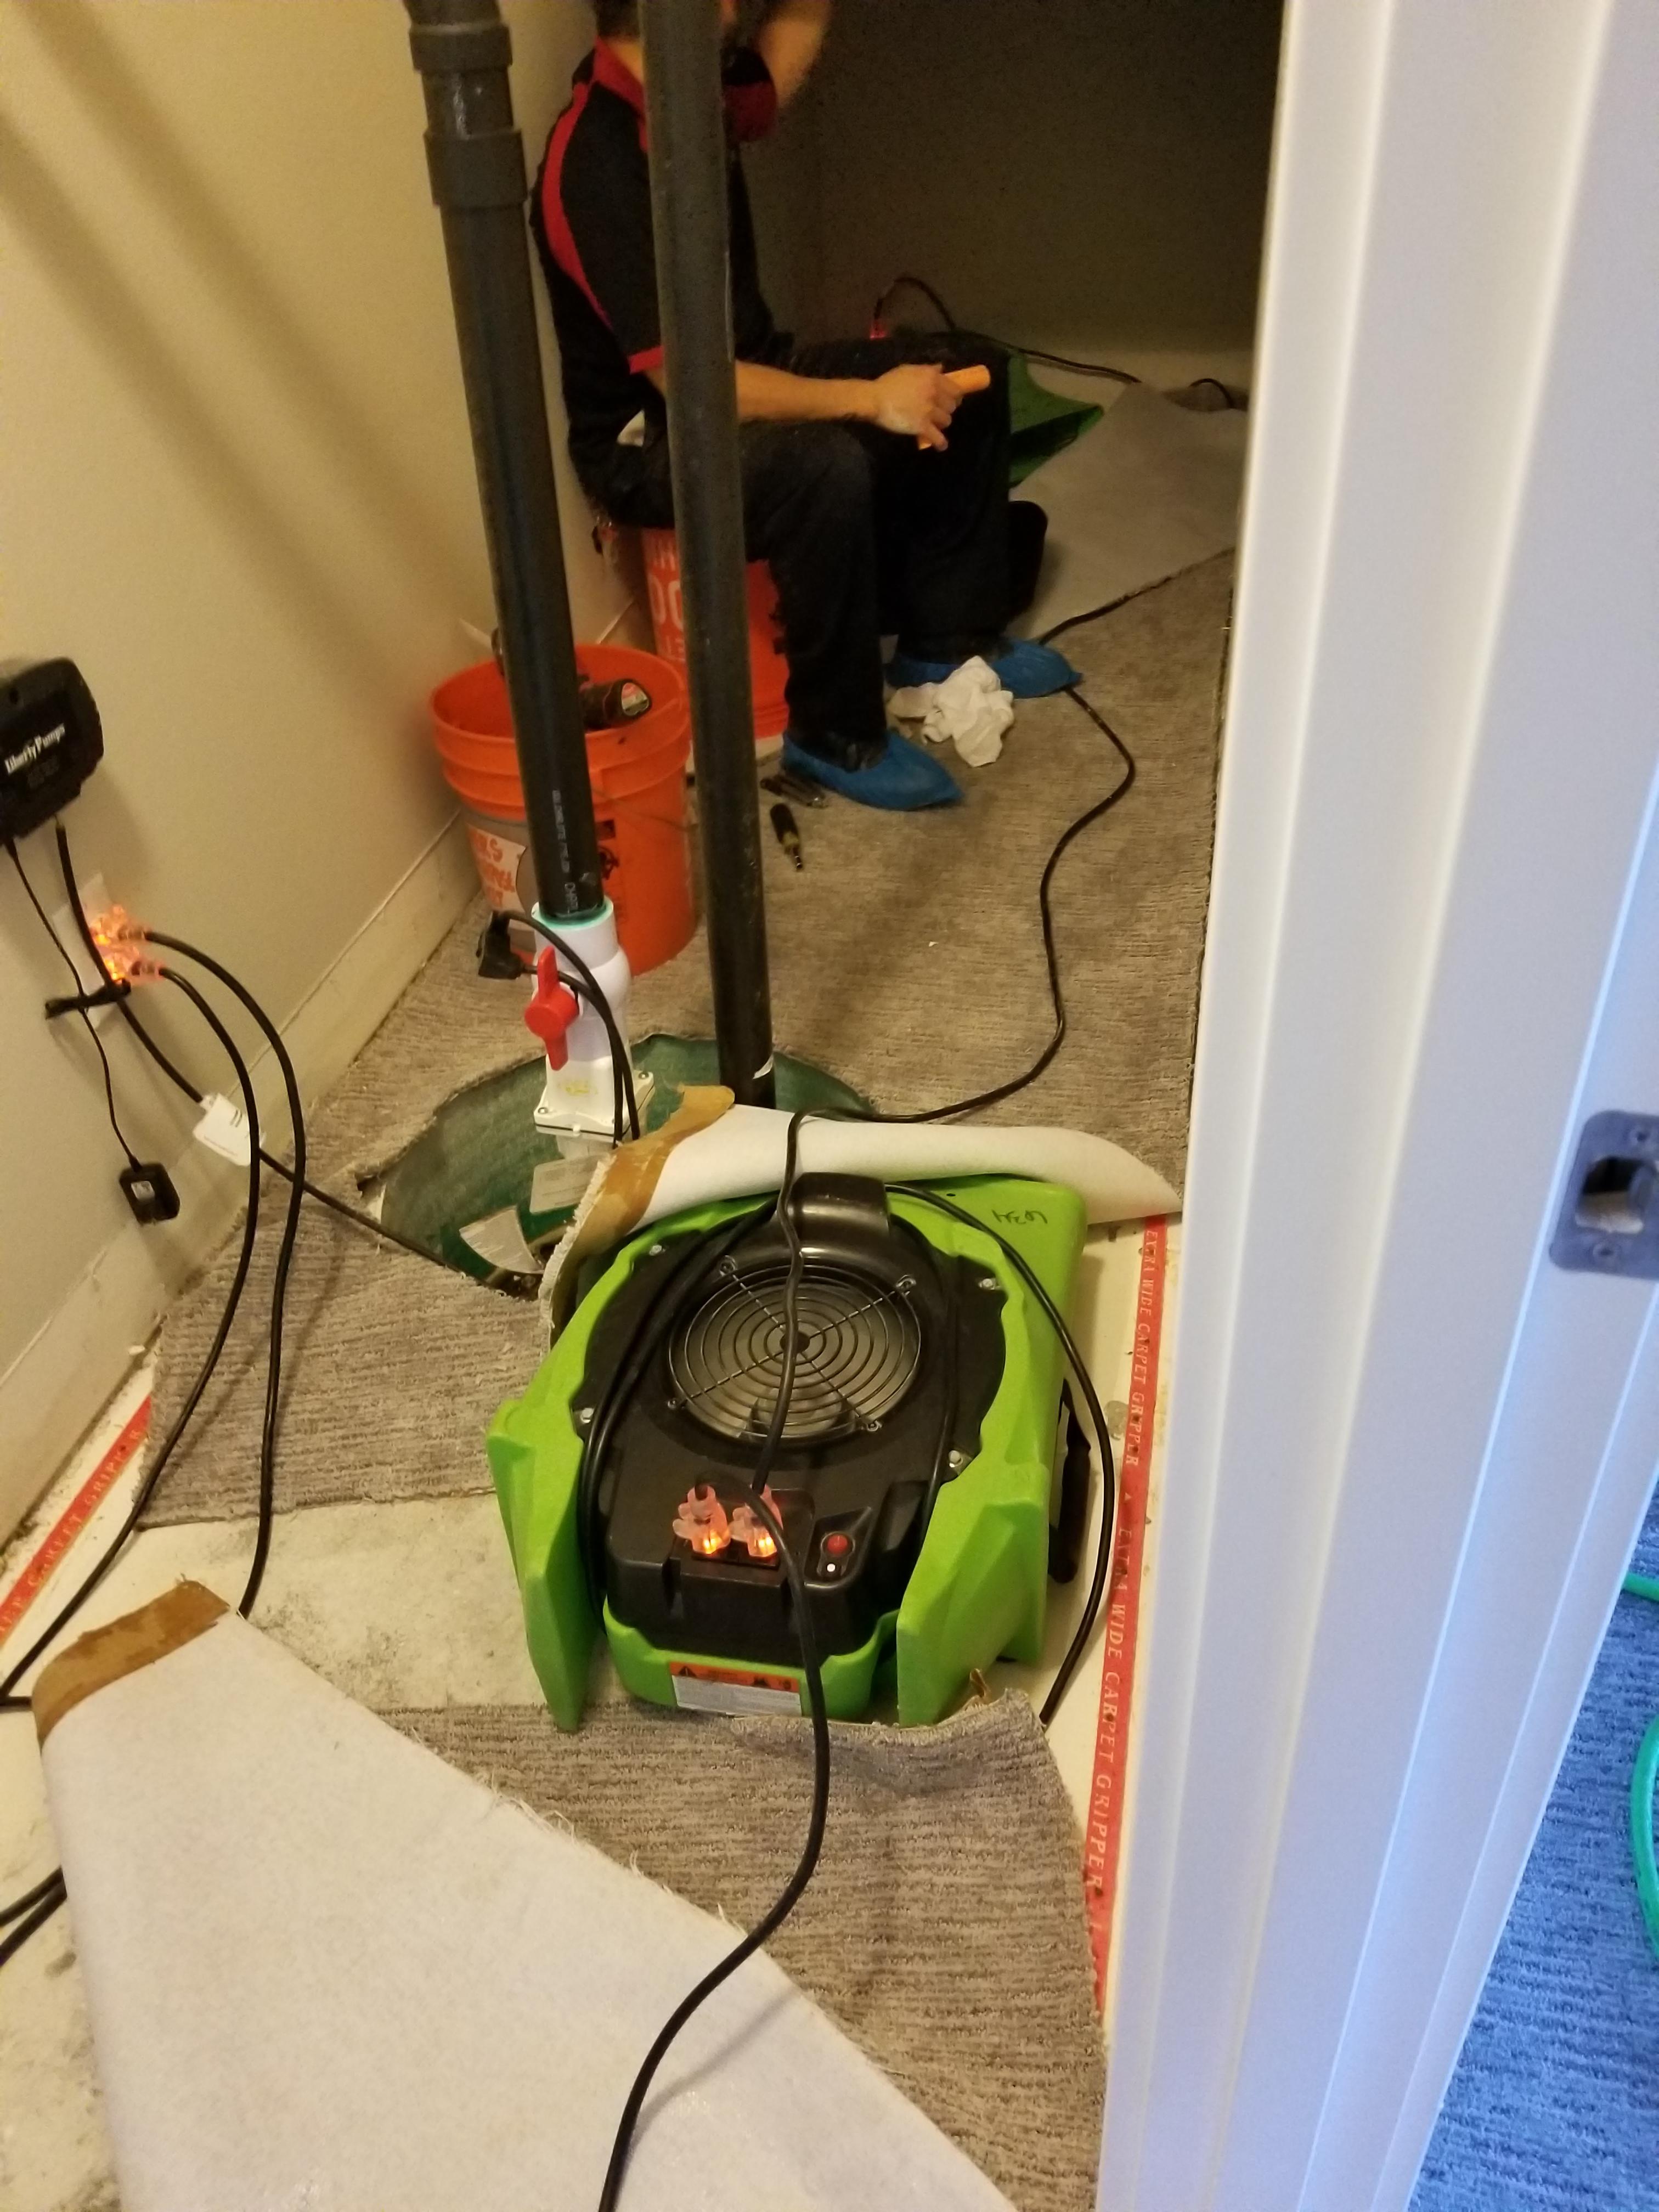 Water damage cleanup in Woodinville, WA.